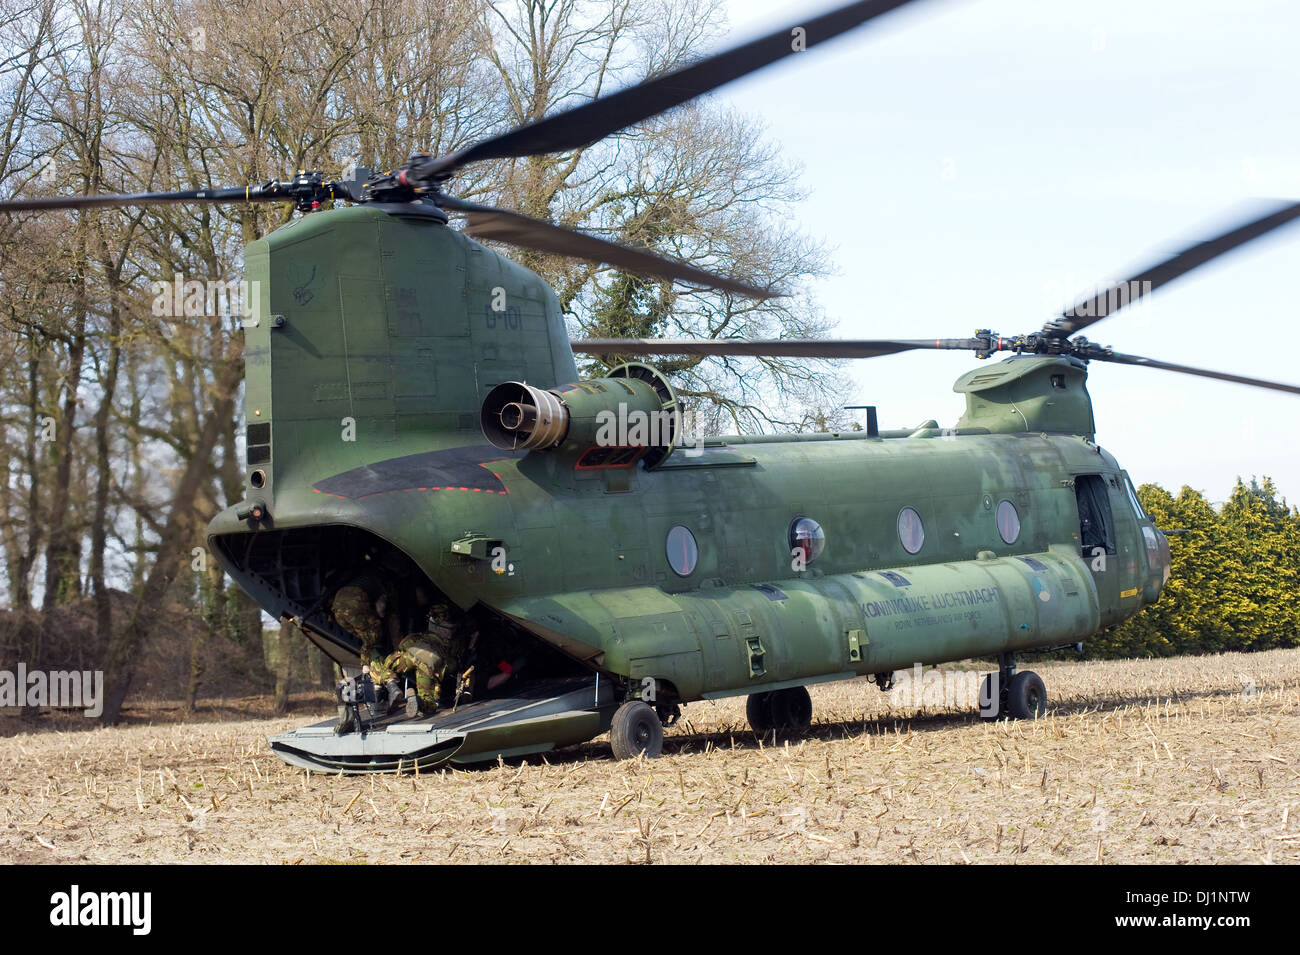 A chinook helicopter from the dutch air force just picked up some soldiers and is just ready to take off Stock Photo